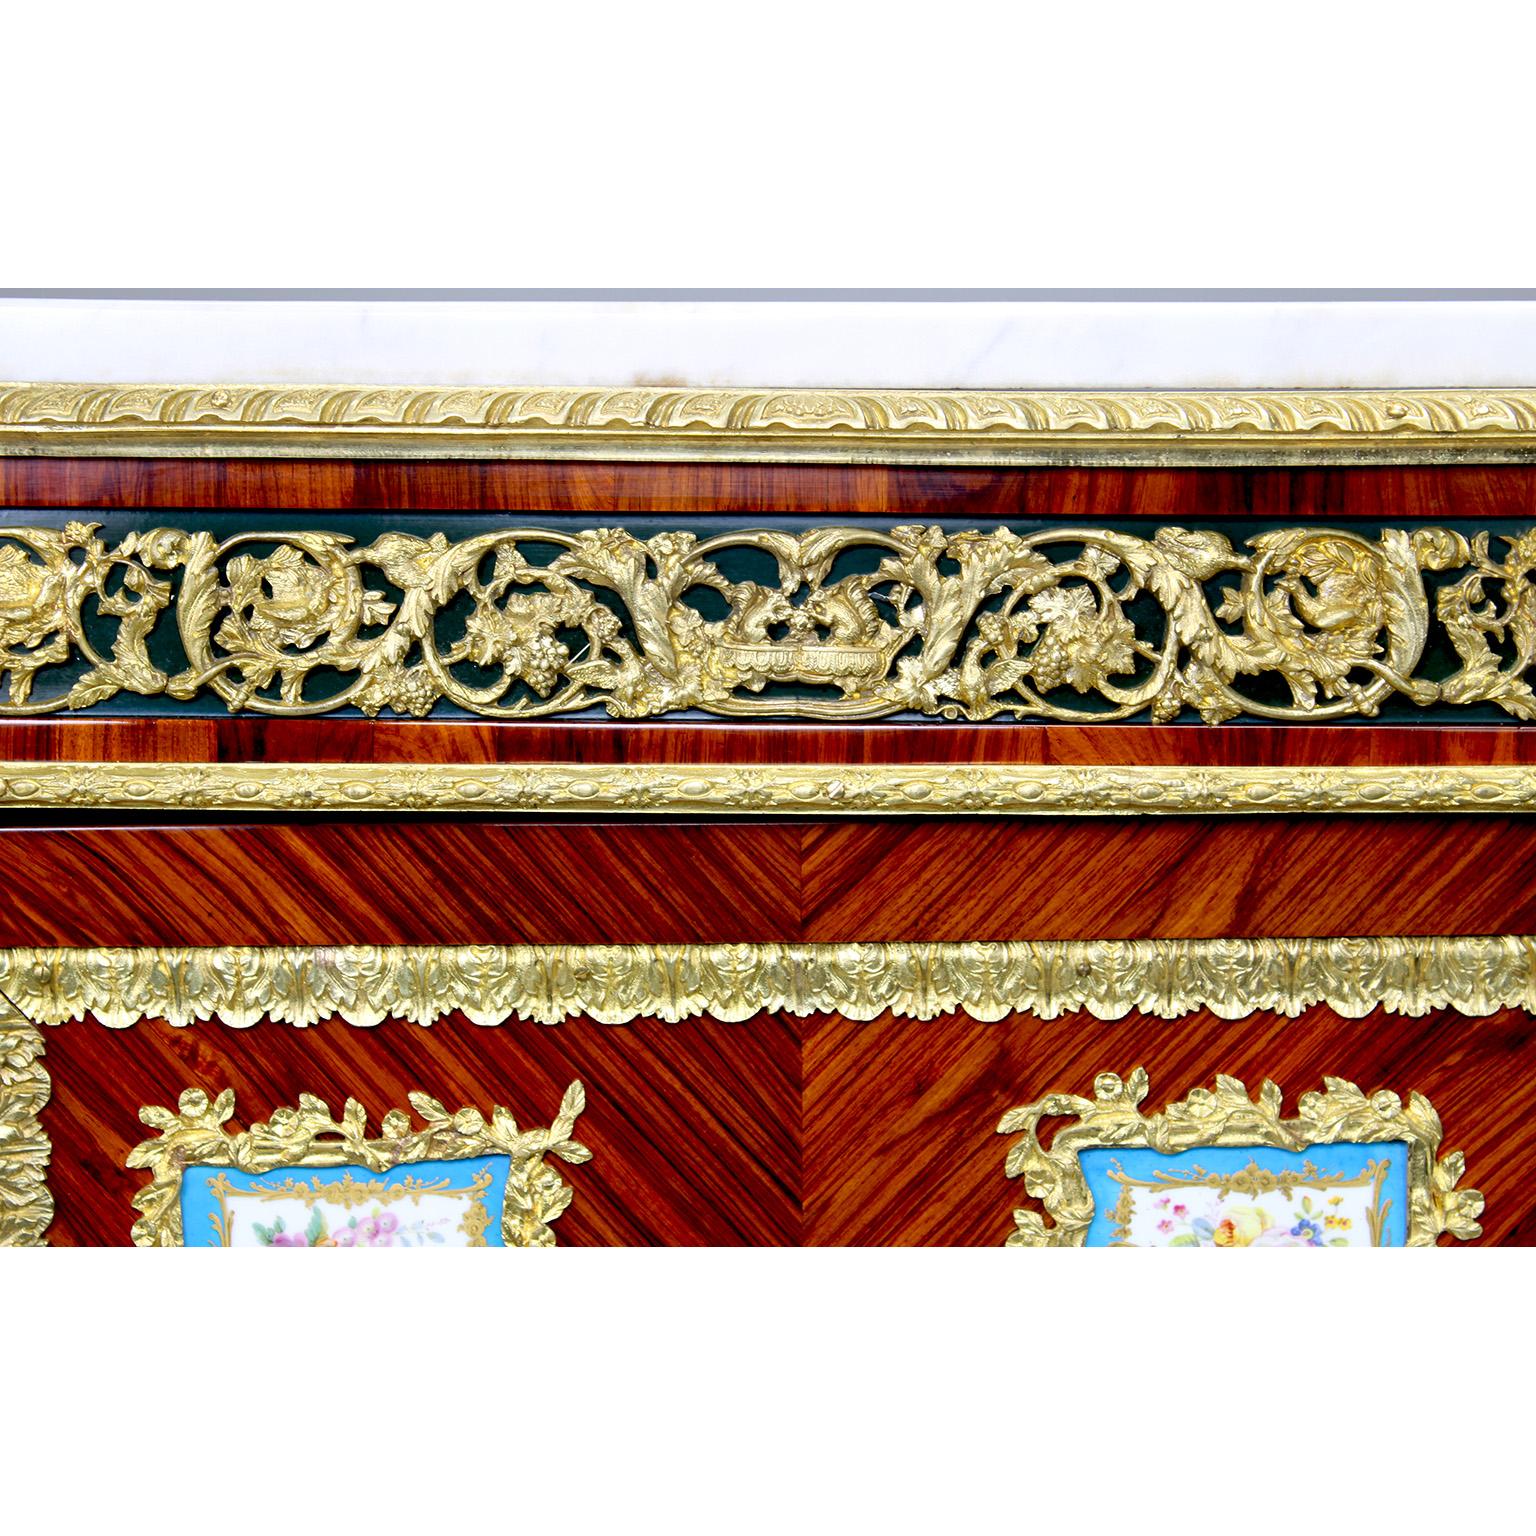 French Napoleon III Ormolu & Porcelain Mounted Cabinet Meuble D'Appui by Befort For Sale 1